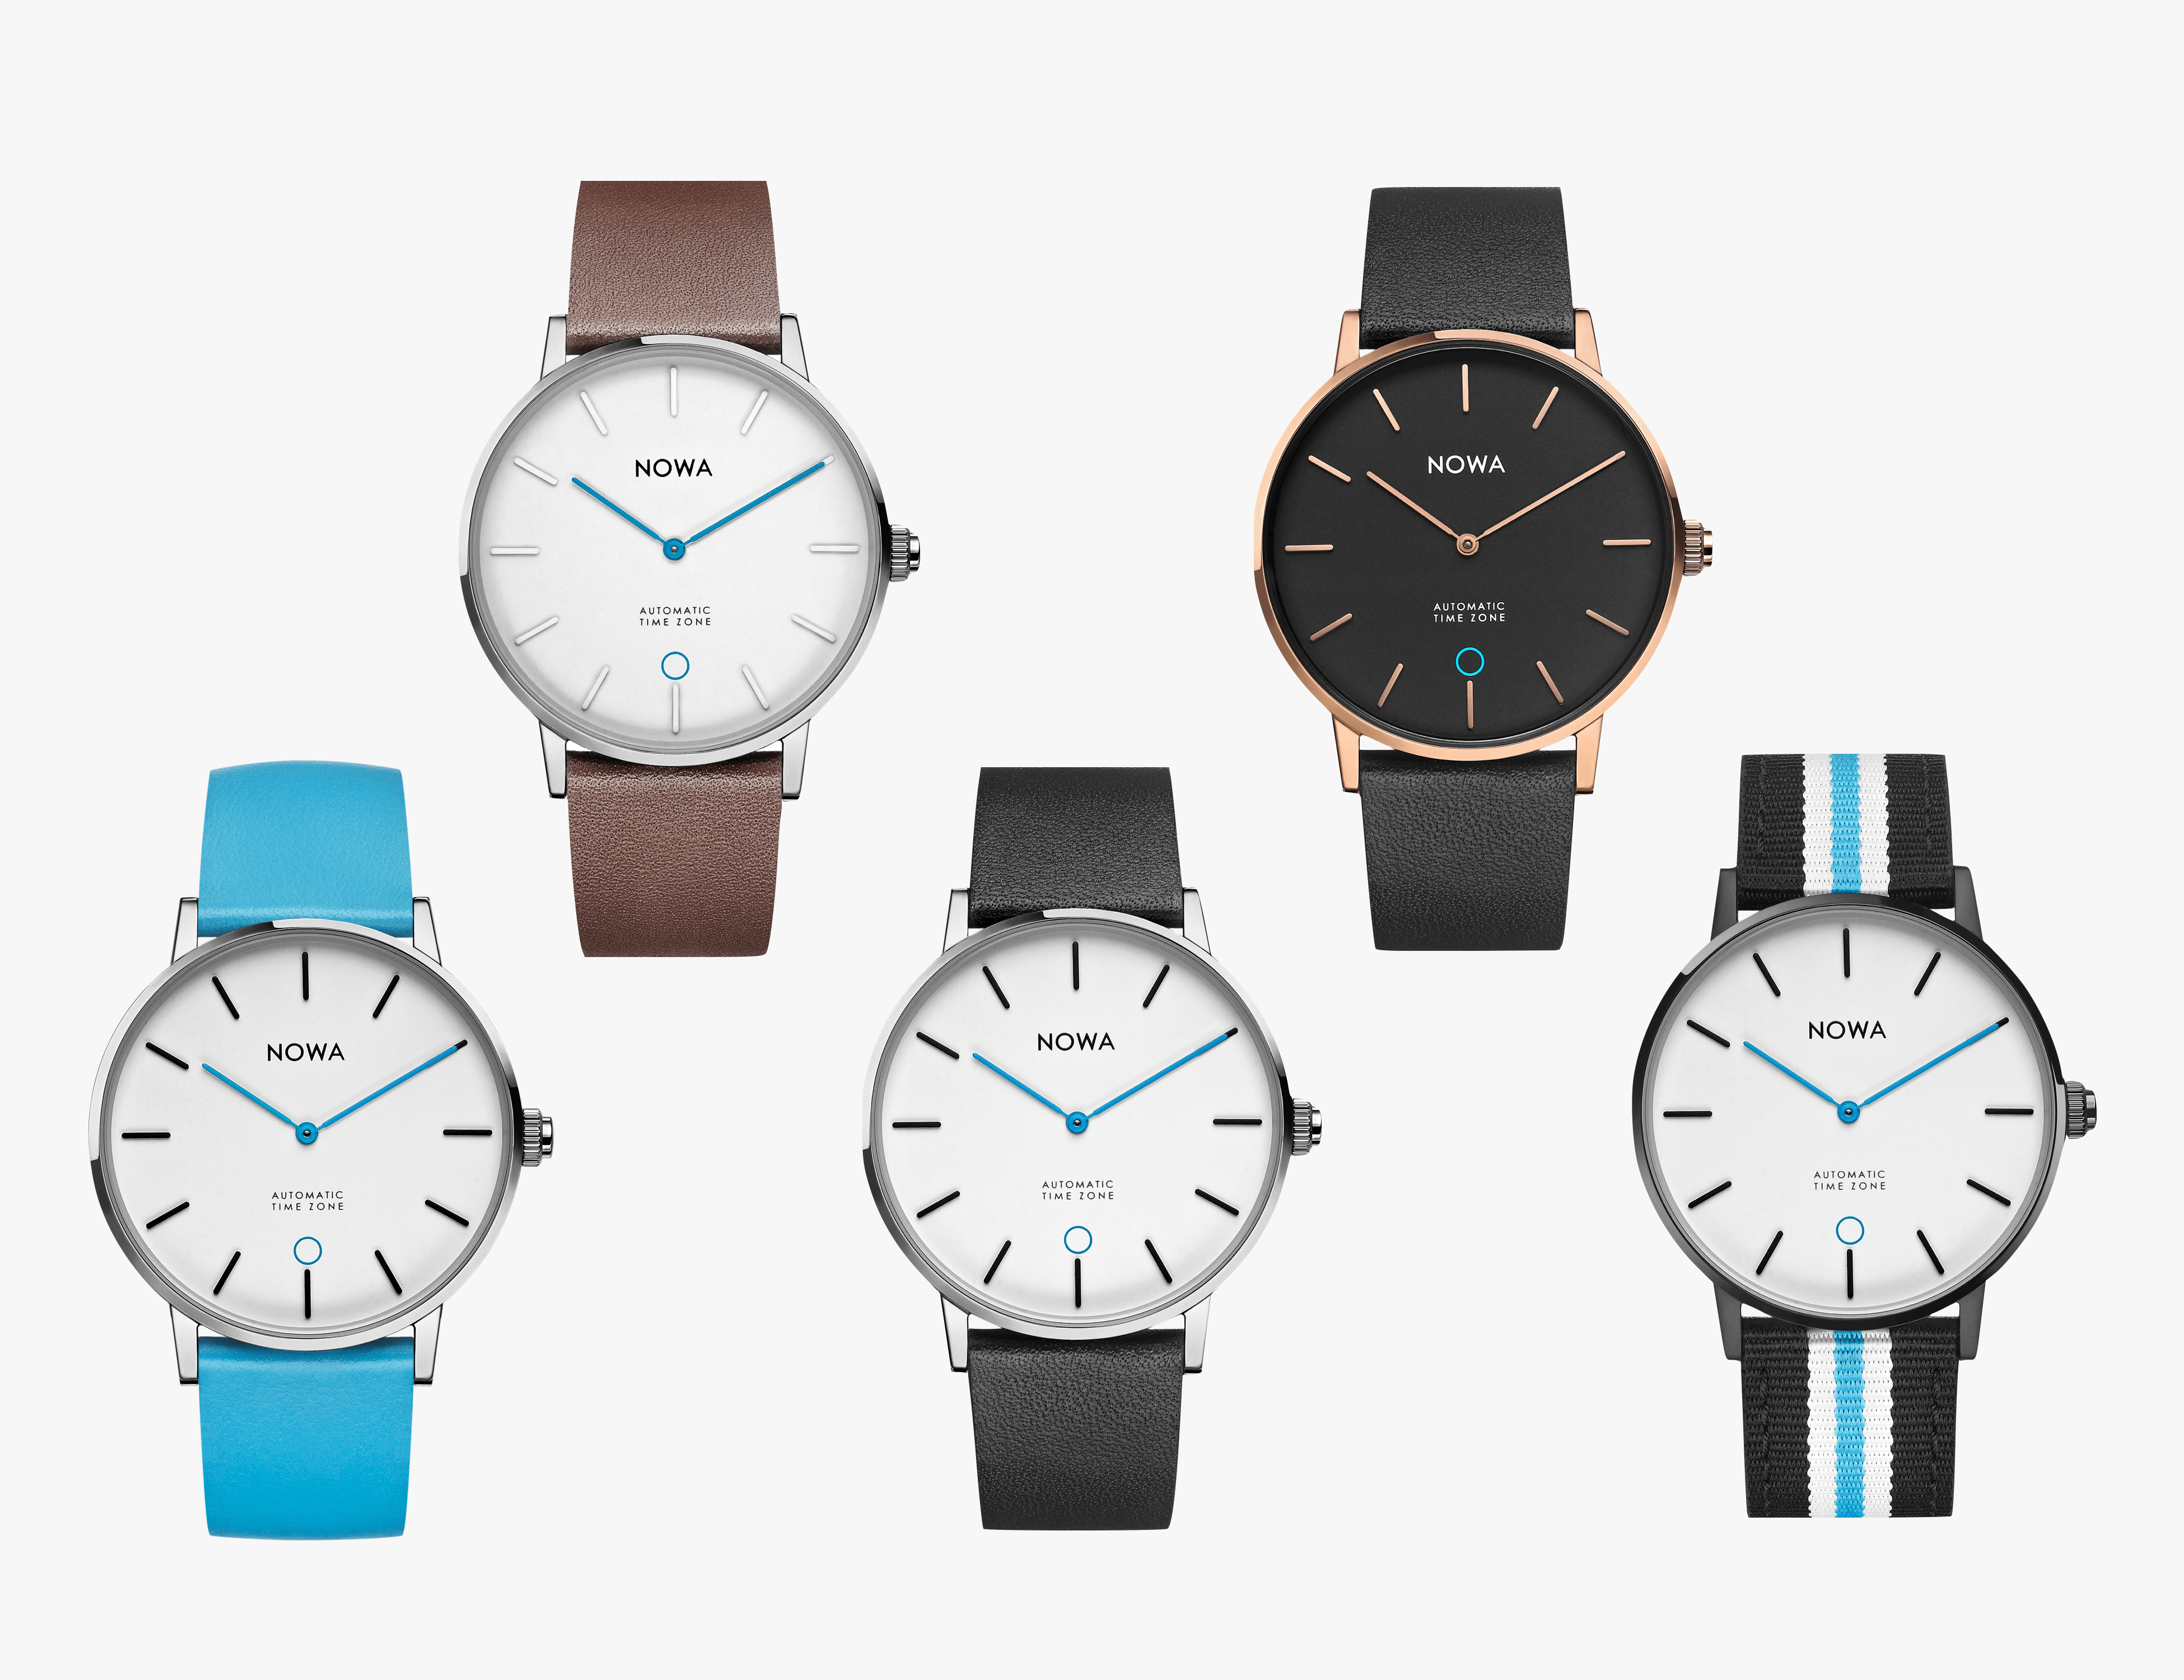 NOWA Replica Watch Brings French Sophistication to Your Wrist